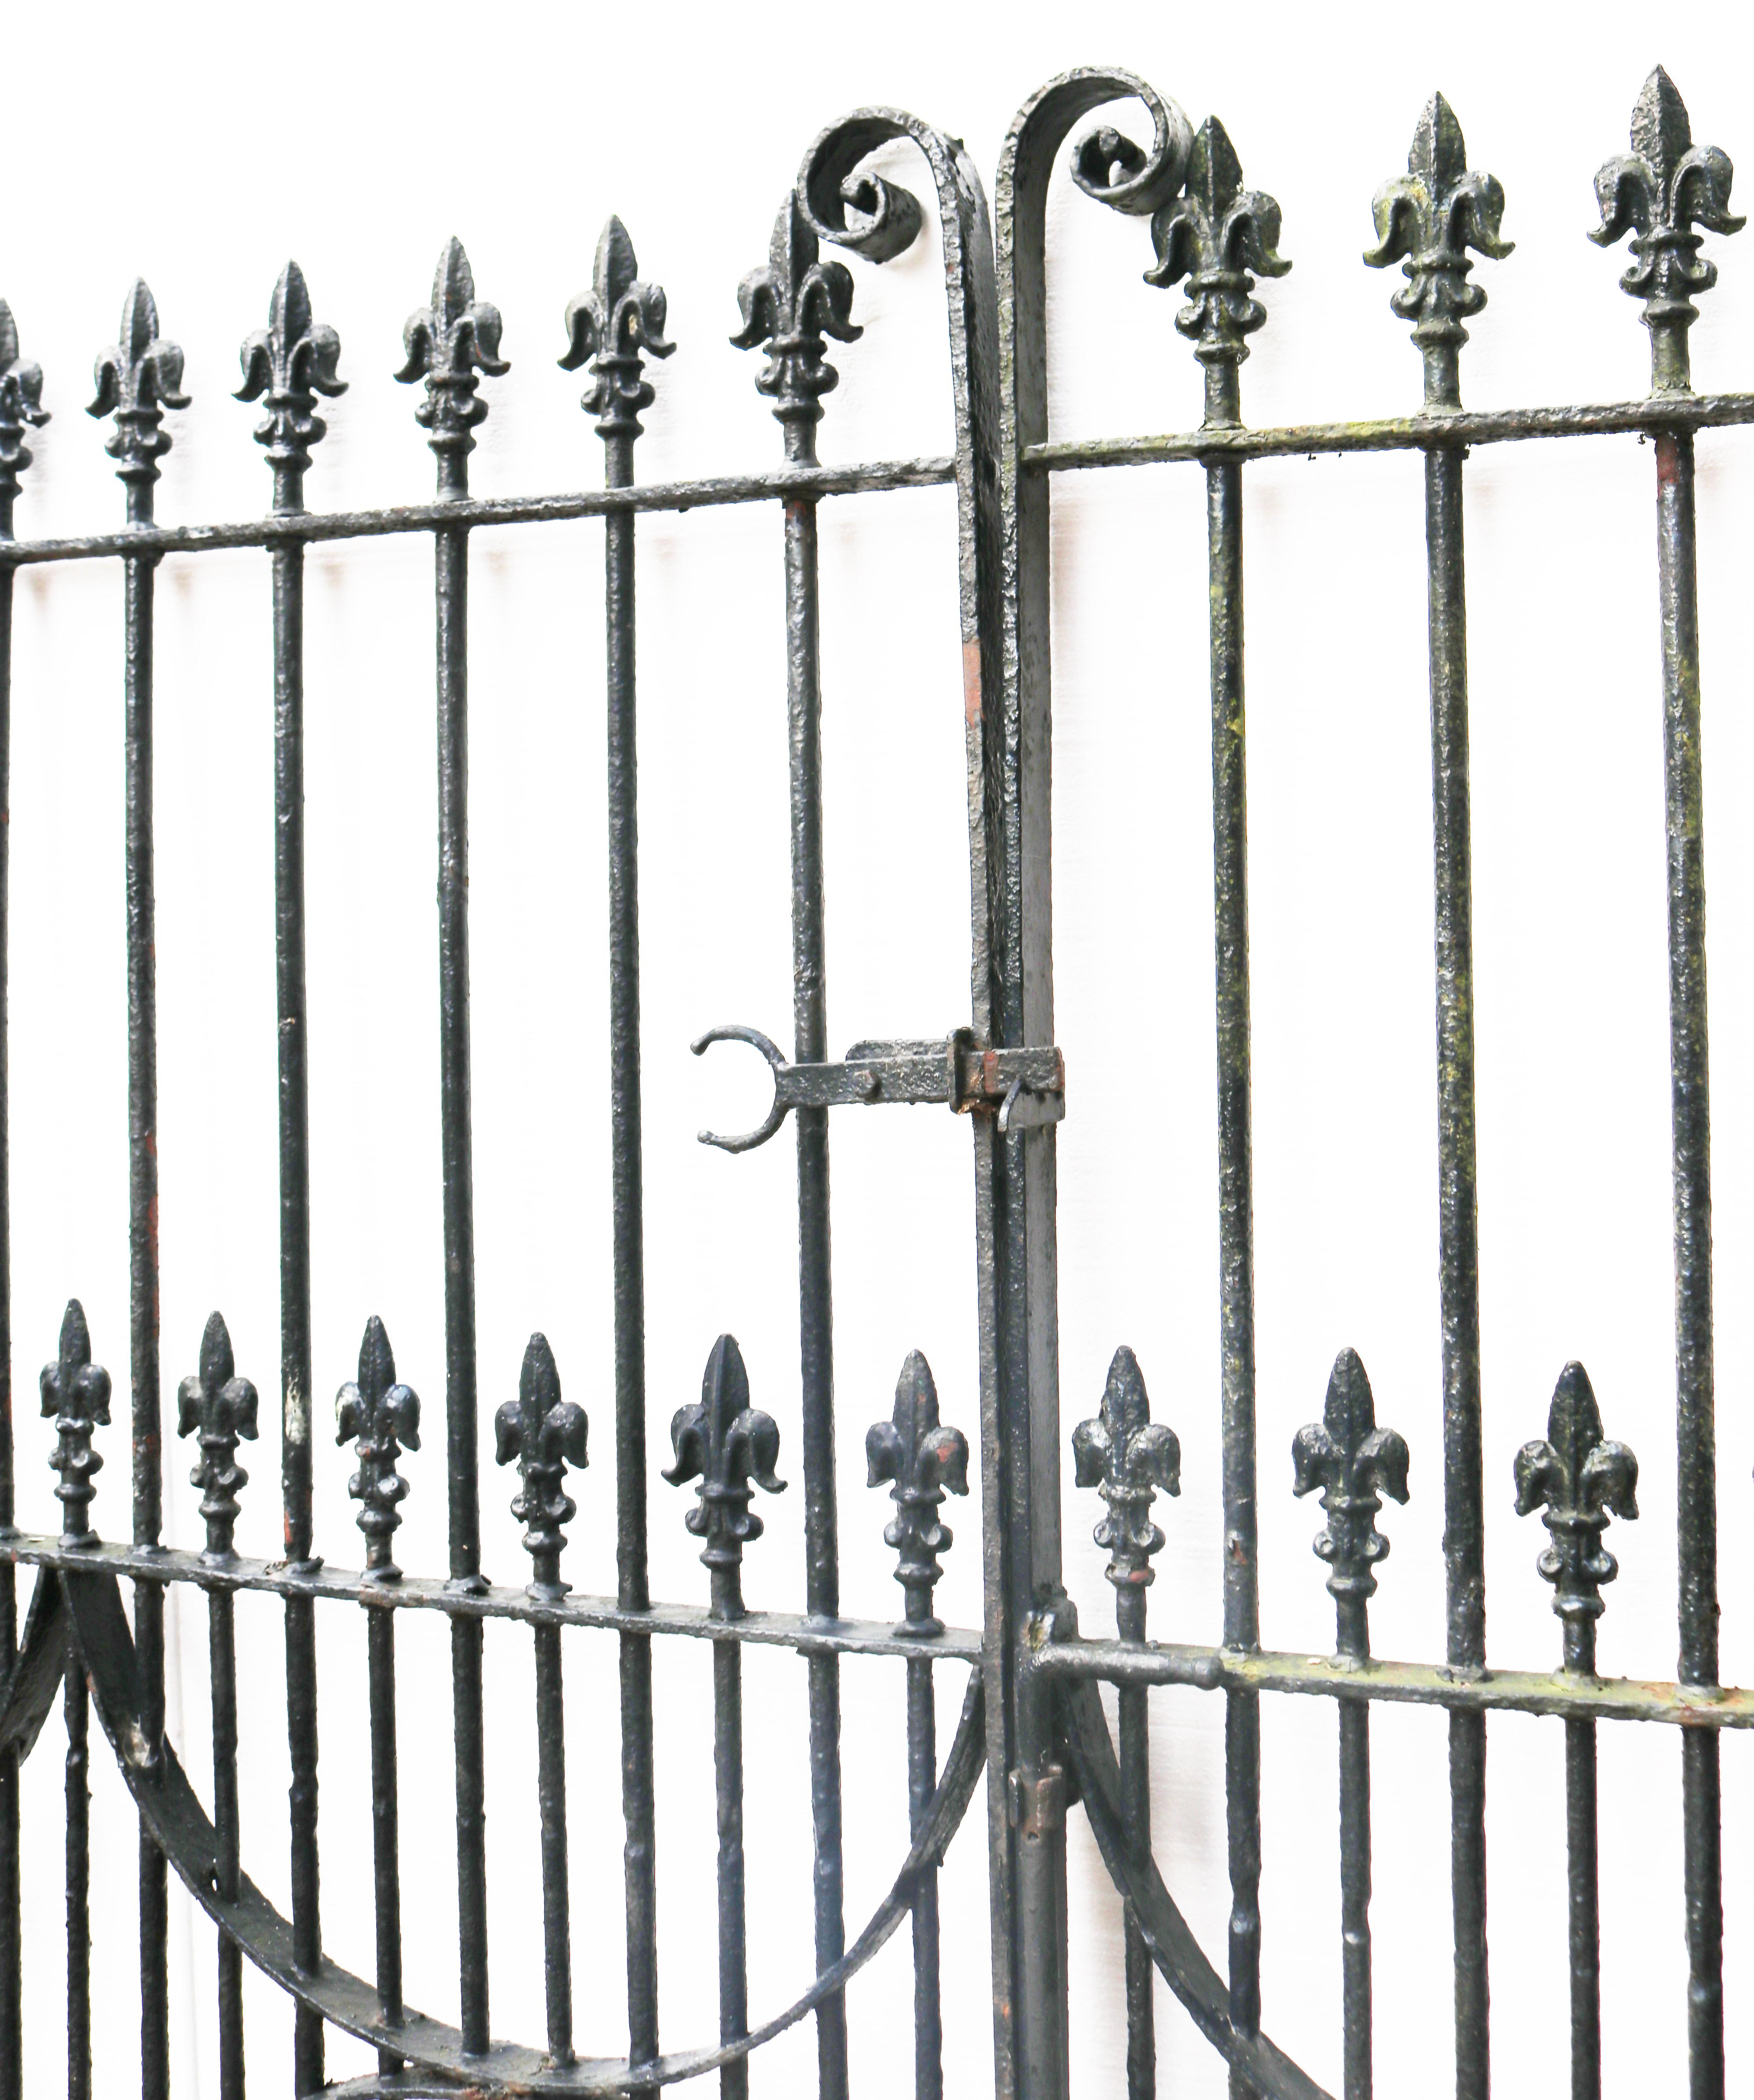 used driveway gates for sale near me